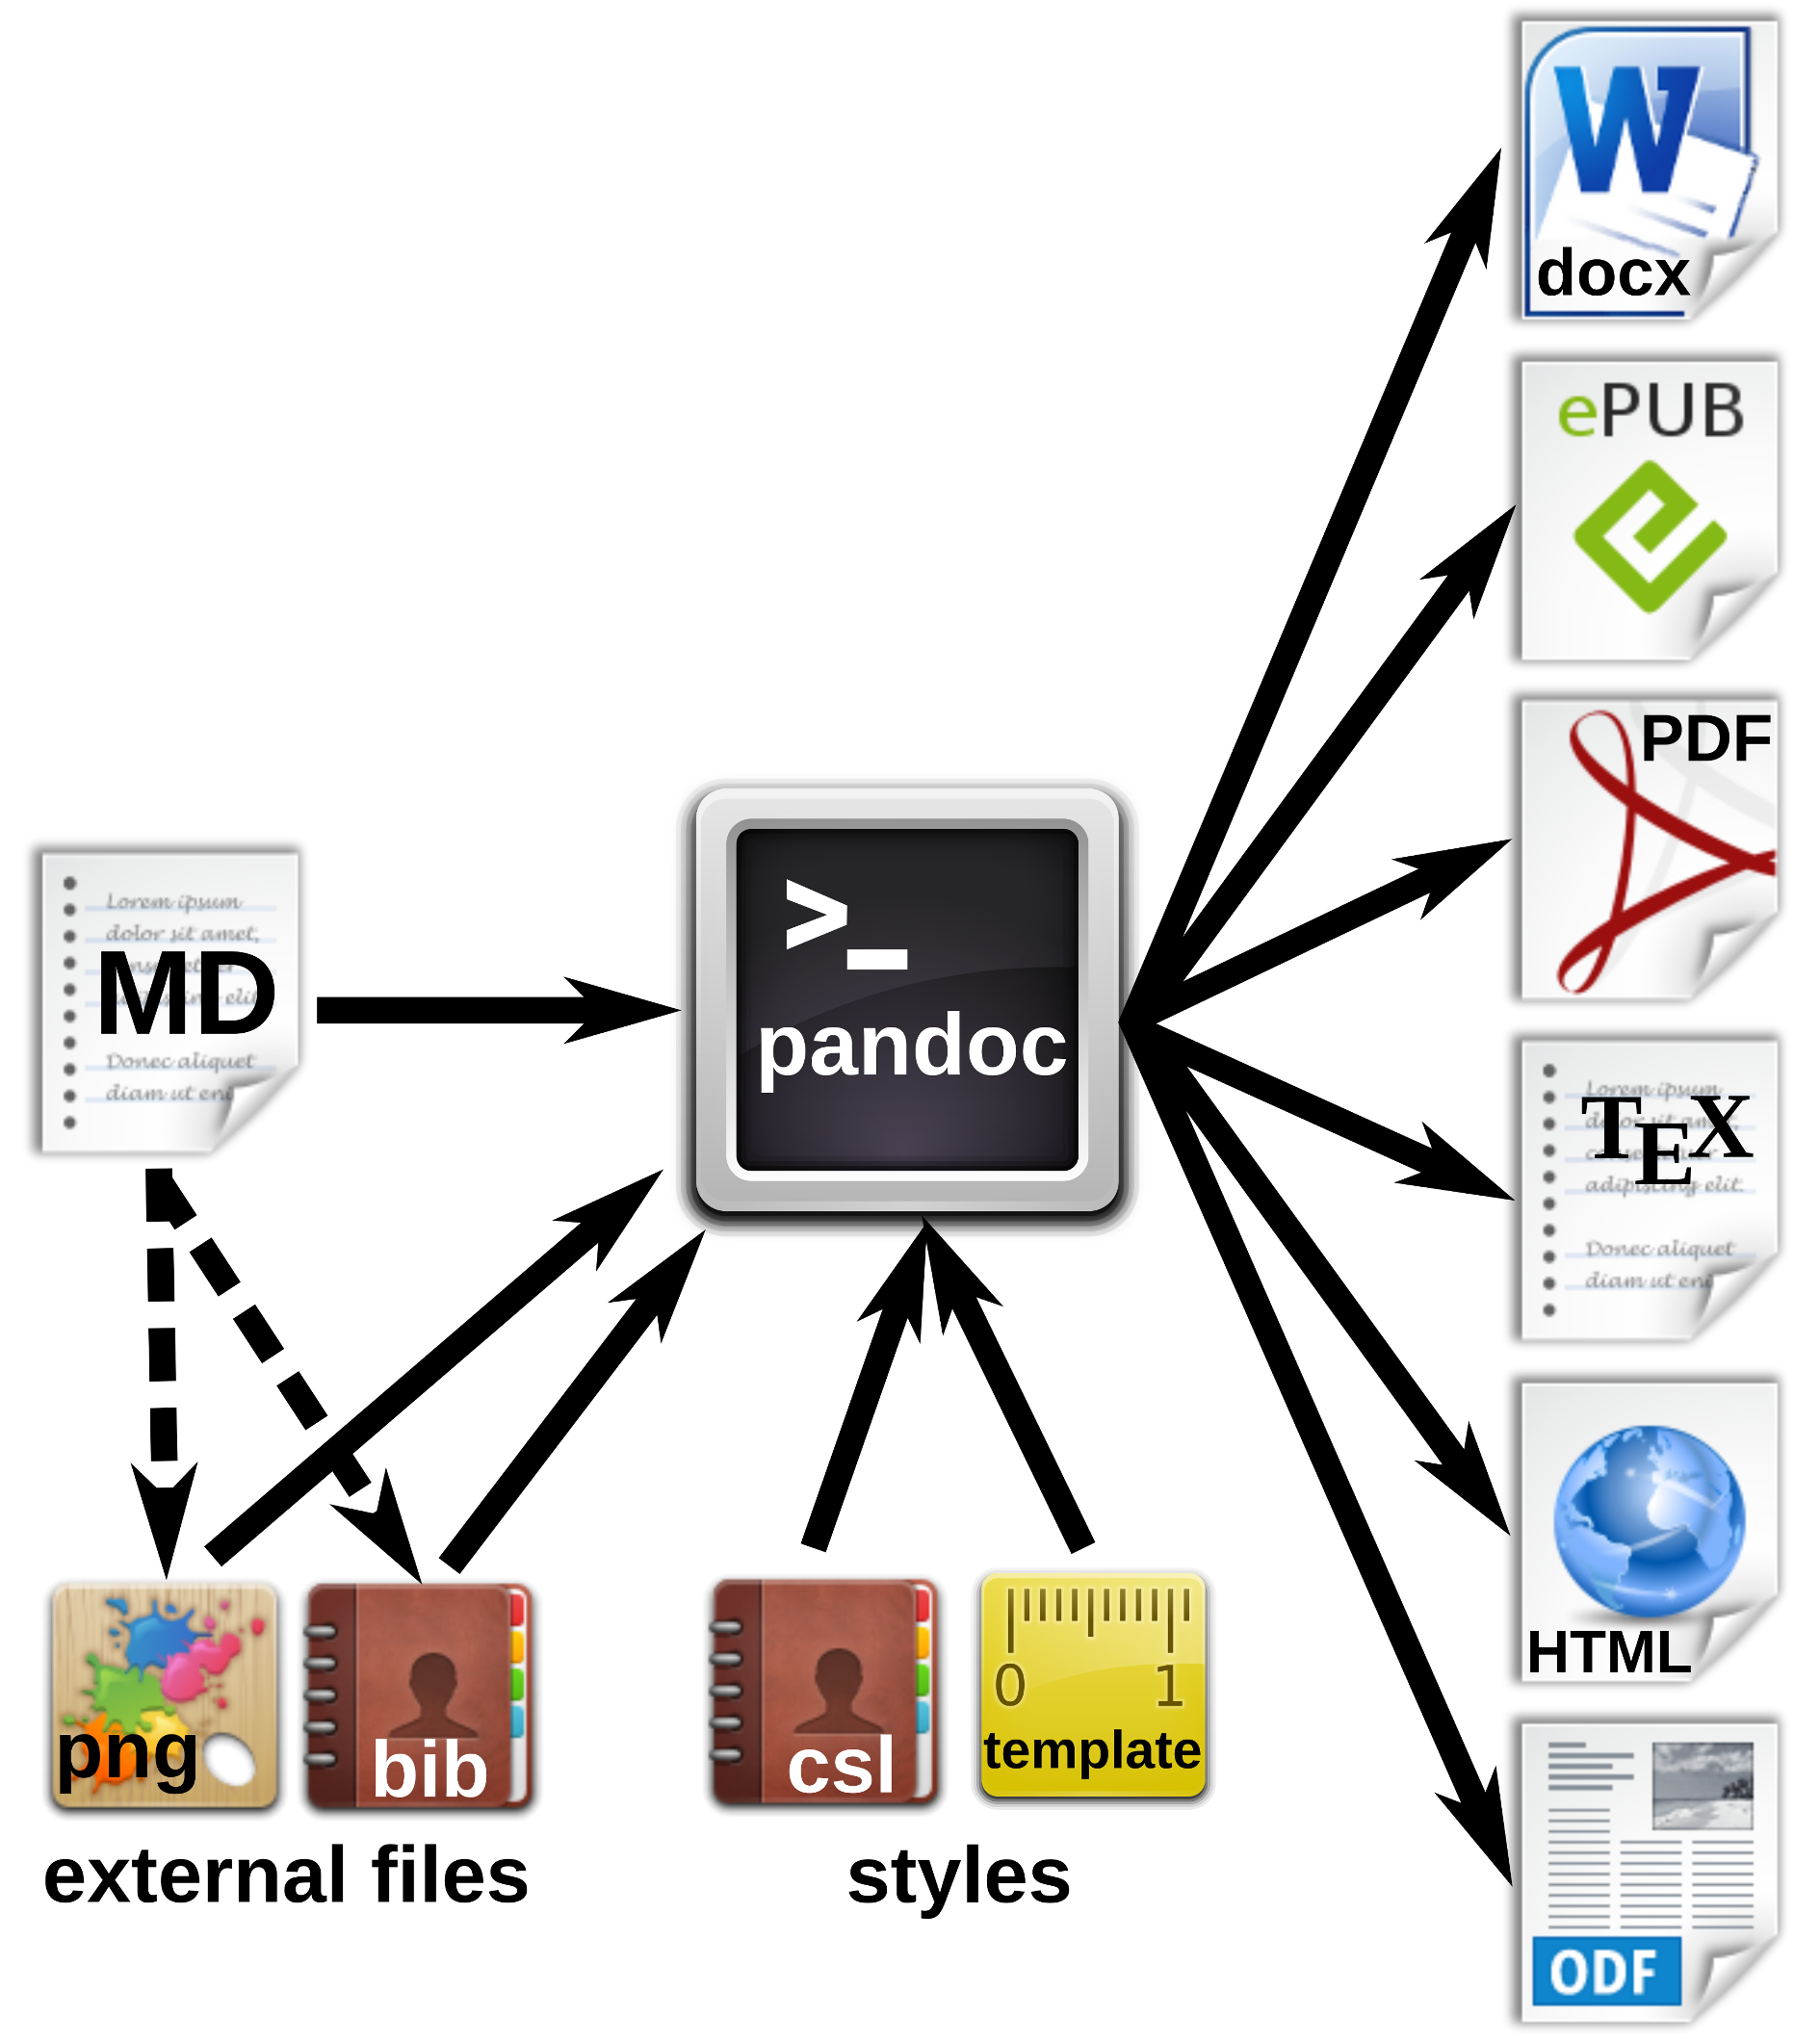 Workfow for the generation of multiple document formats with pandoc. The markdown (MD) file contains the manuscript text with formatting tags, and can also refer to external files such as images or reference databases. The pandoc processor converts the MD file to the desired output formats. Documents, citations etc. can be defined in style files or templates.